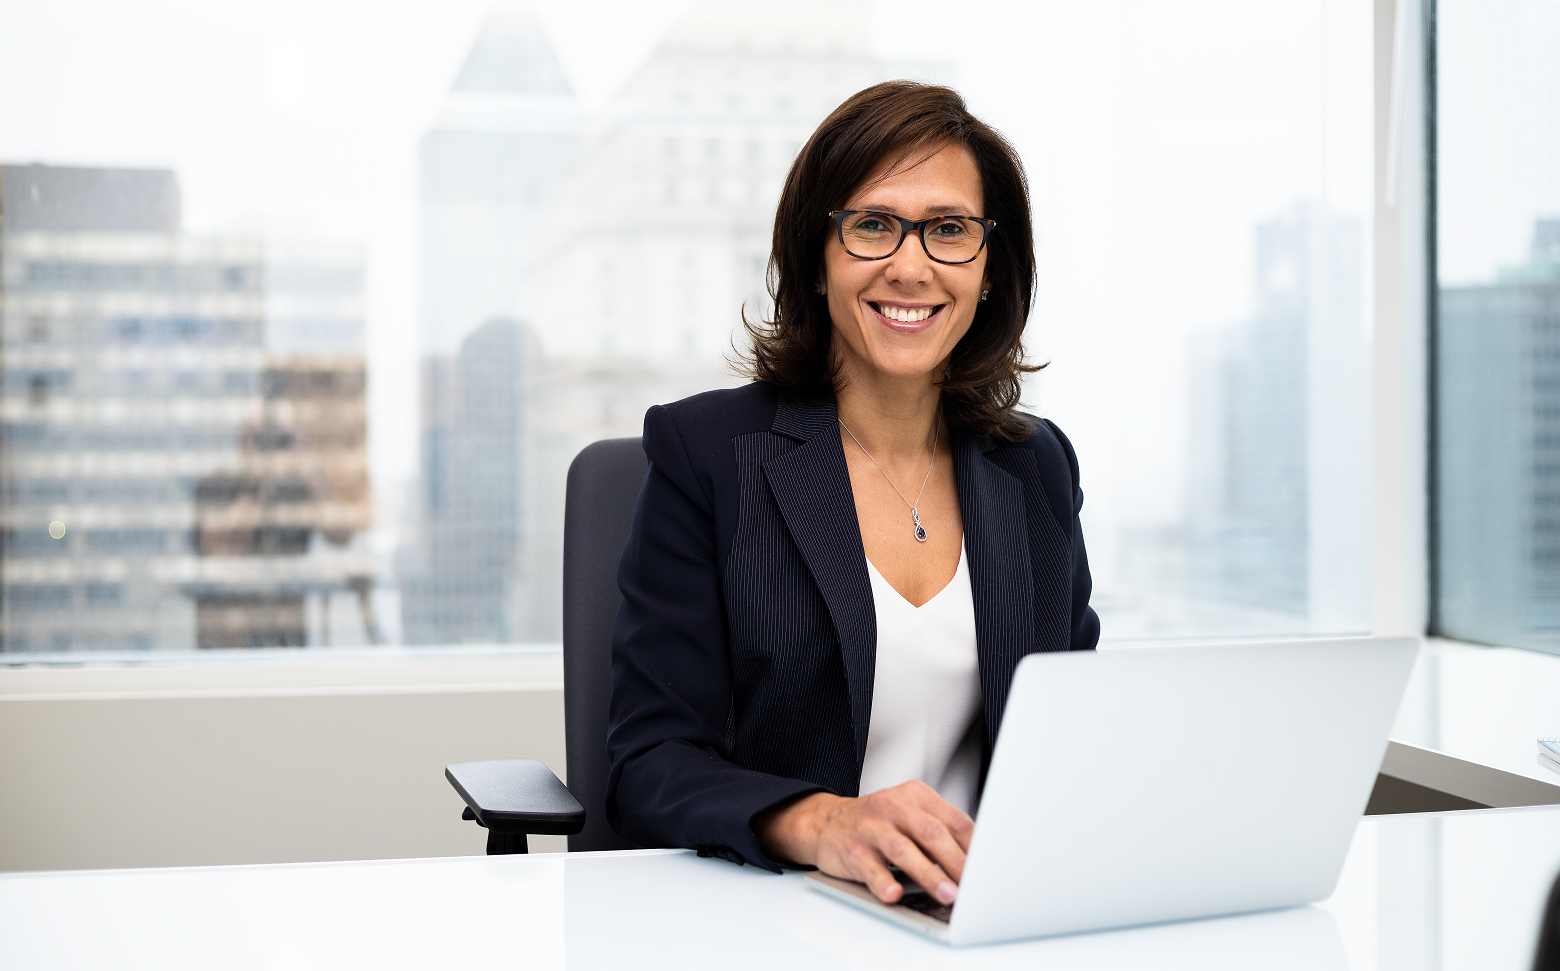 Roula Zaarour sits at an office desk with a laptop in front of large window. She has medium-length, dark brown hair and is wearing a navy-blue blazer with white shirt and dark-framed glasses. 